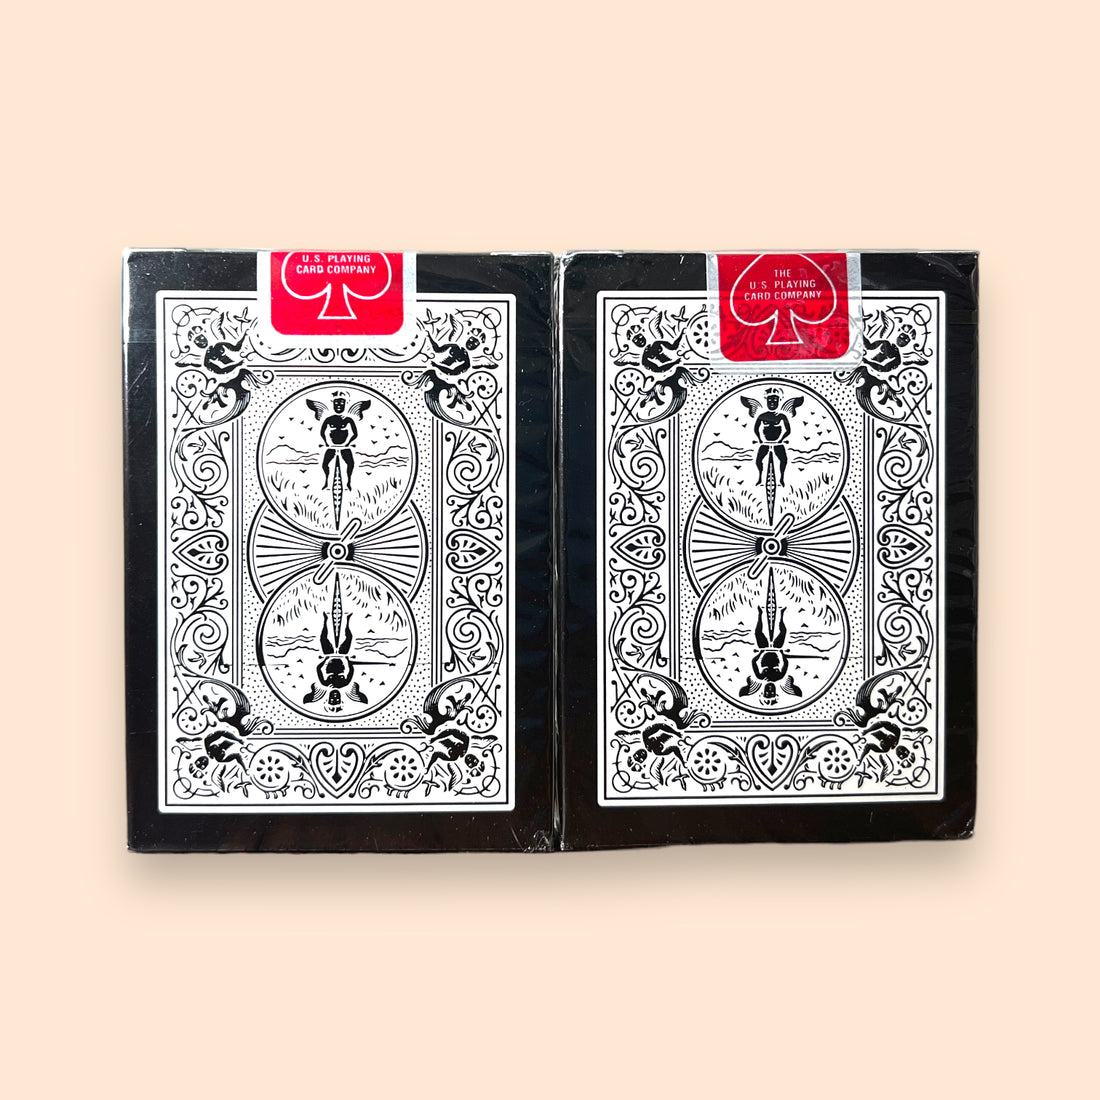 Bicycle Black Tigers White + Red Pips Playing Cards [1st Edition]